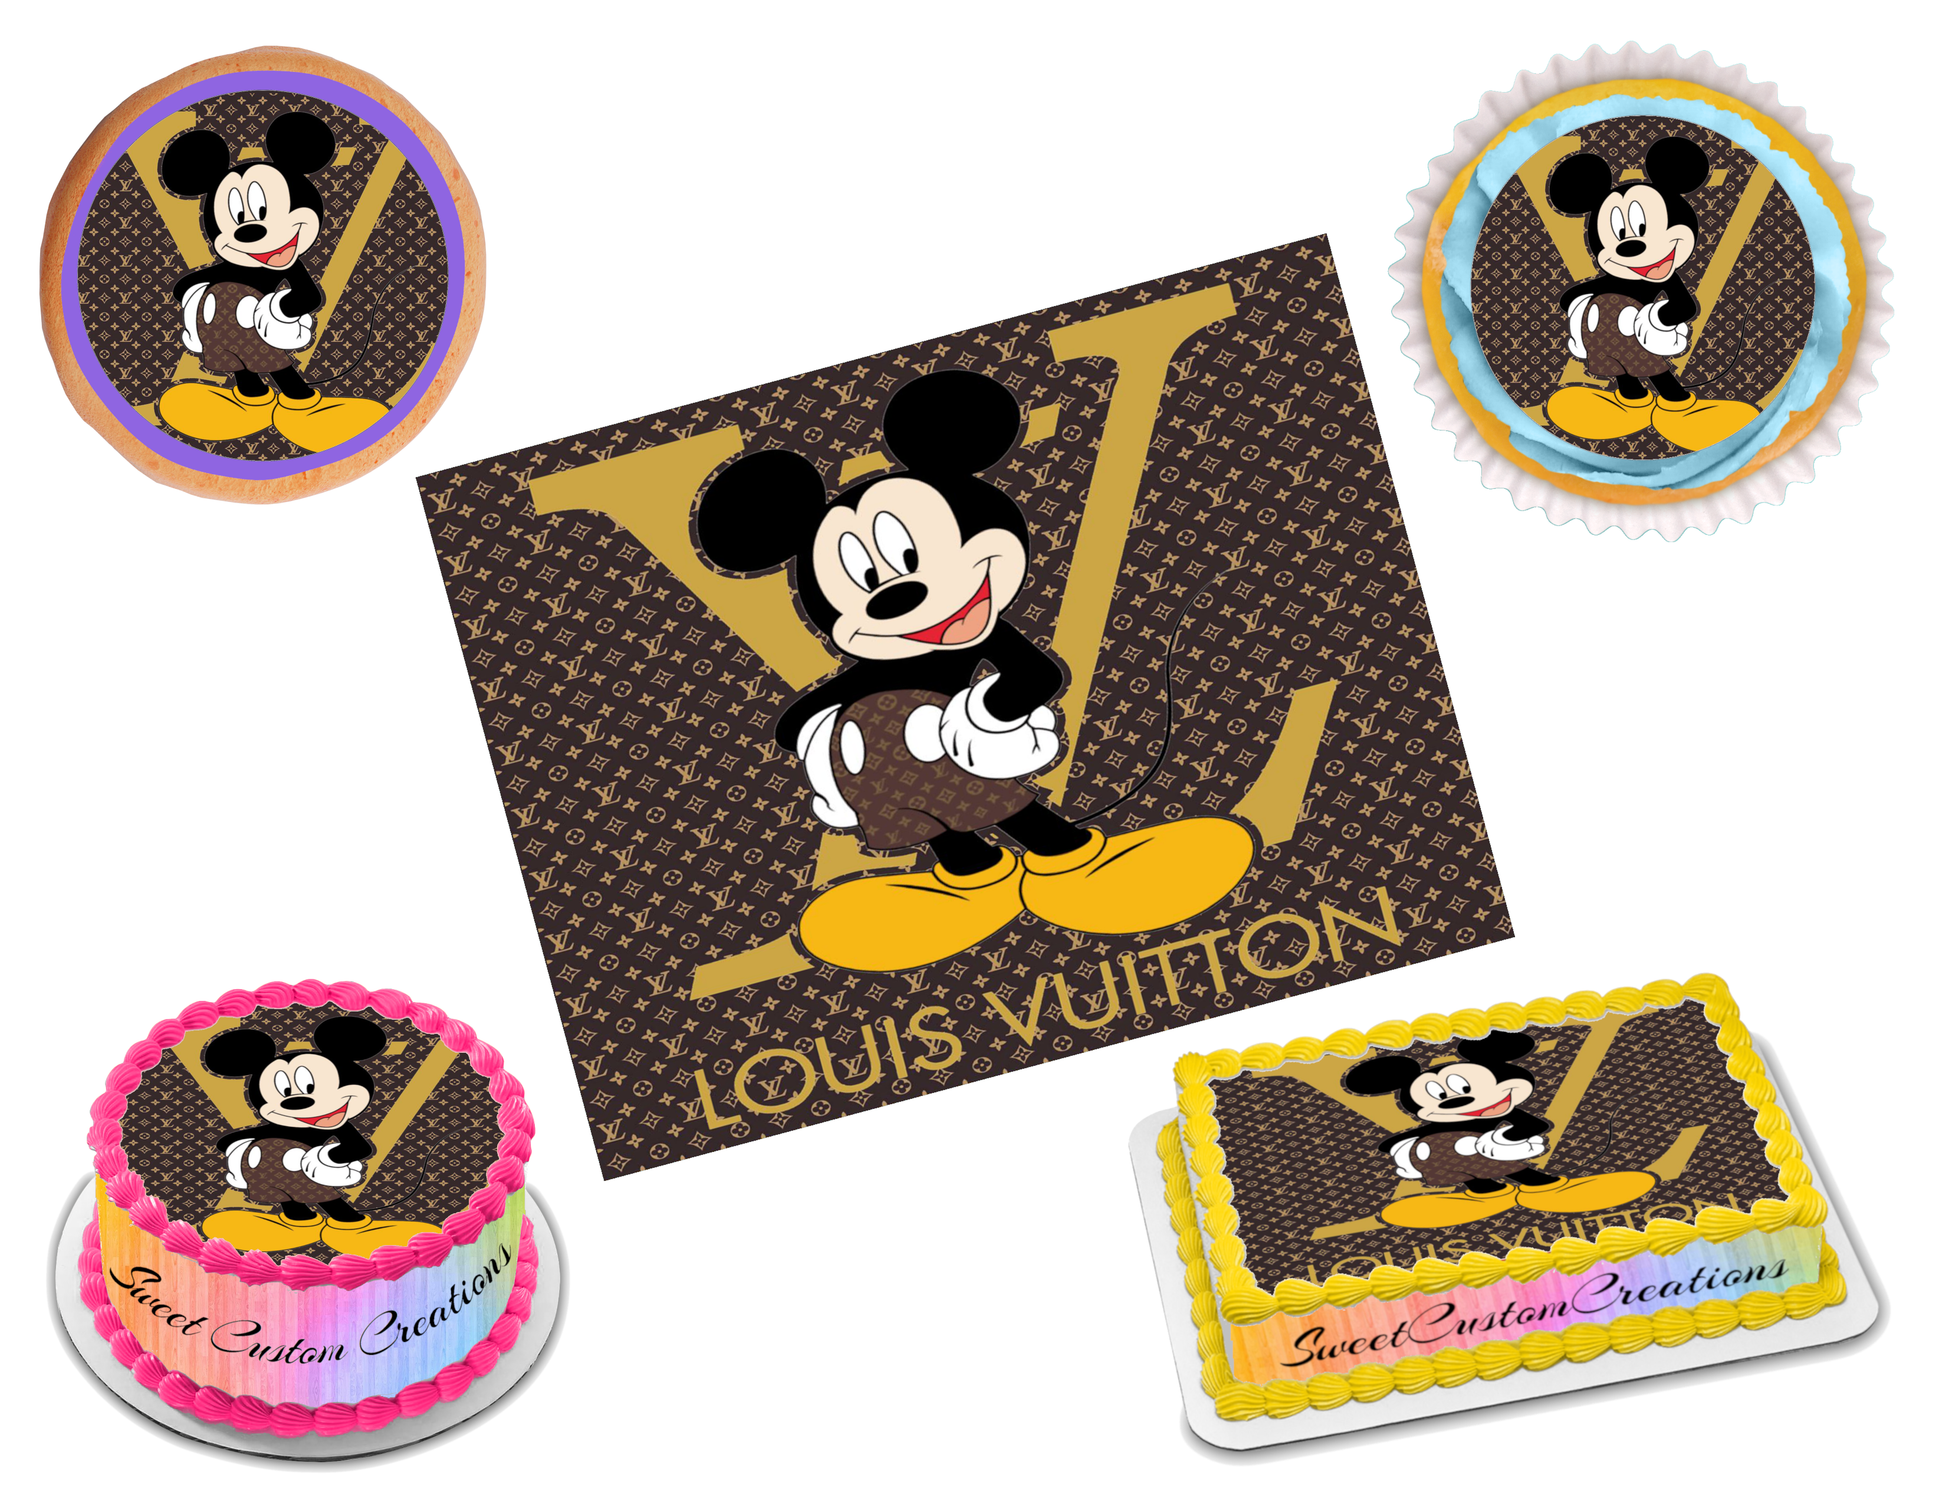 Mickey mouse louis vuitton HD wallpapers